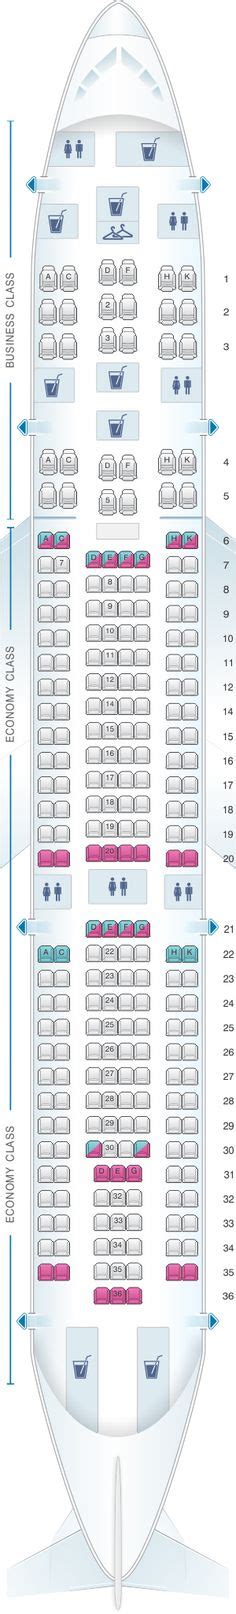 Seat Map And Seating Chart Avianca Airbus A Fleet Airbus Porn Sex Picture